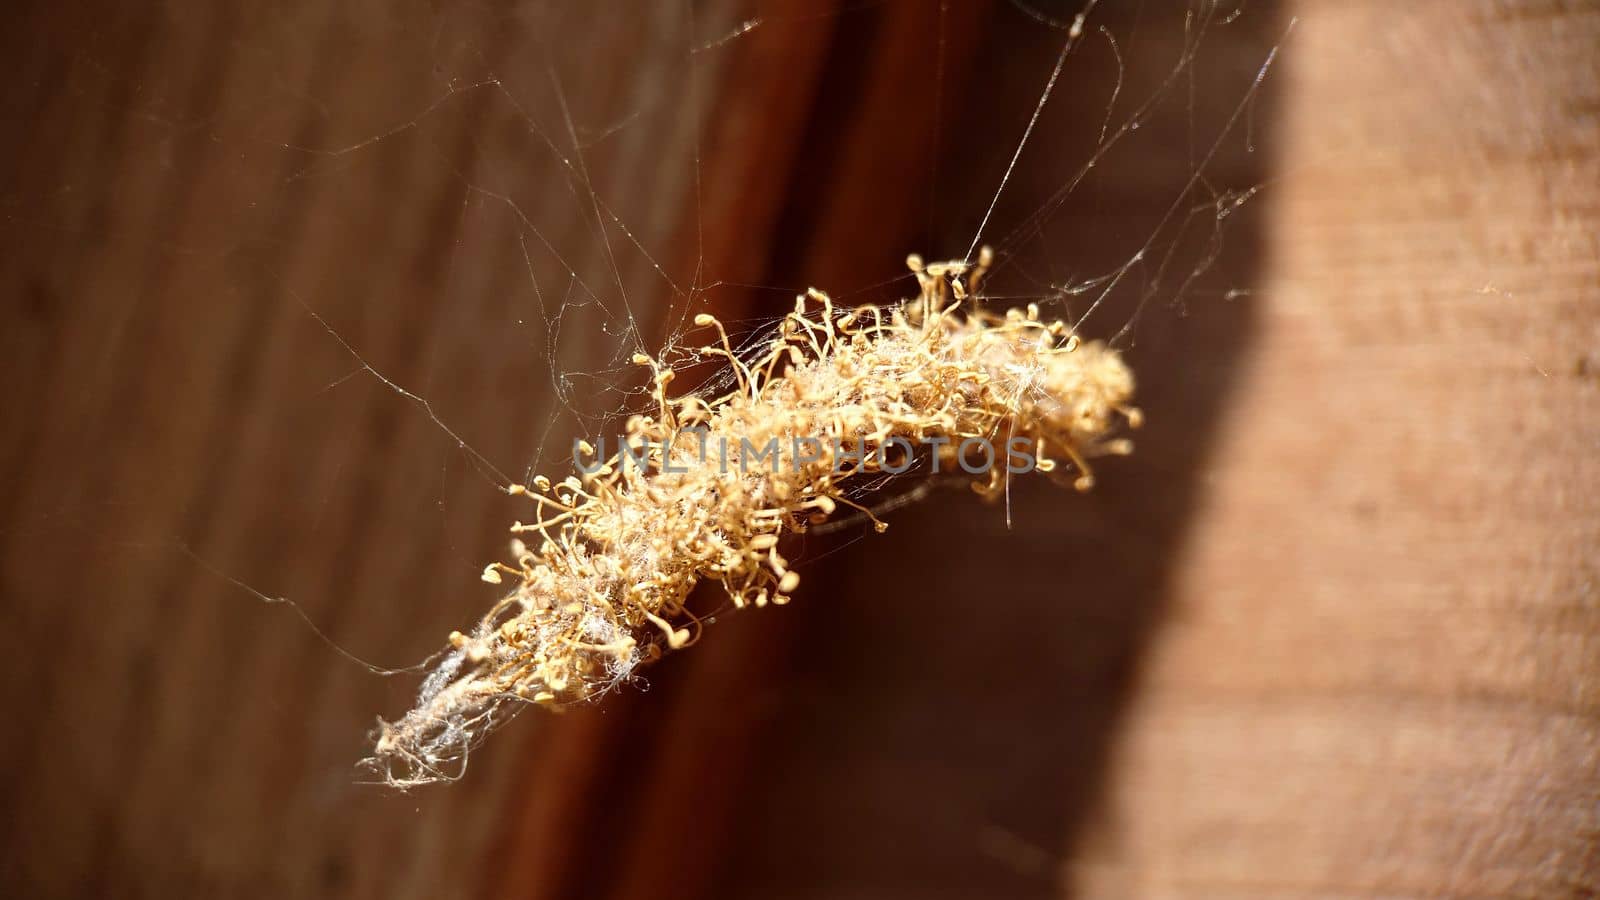 A dry golden bundle with a larva inside hangs on the web by Mastak80